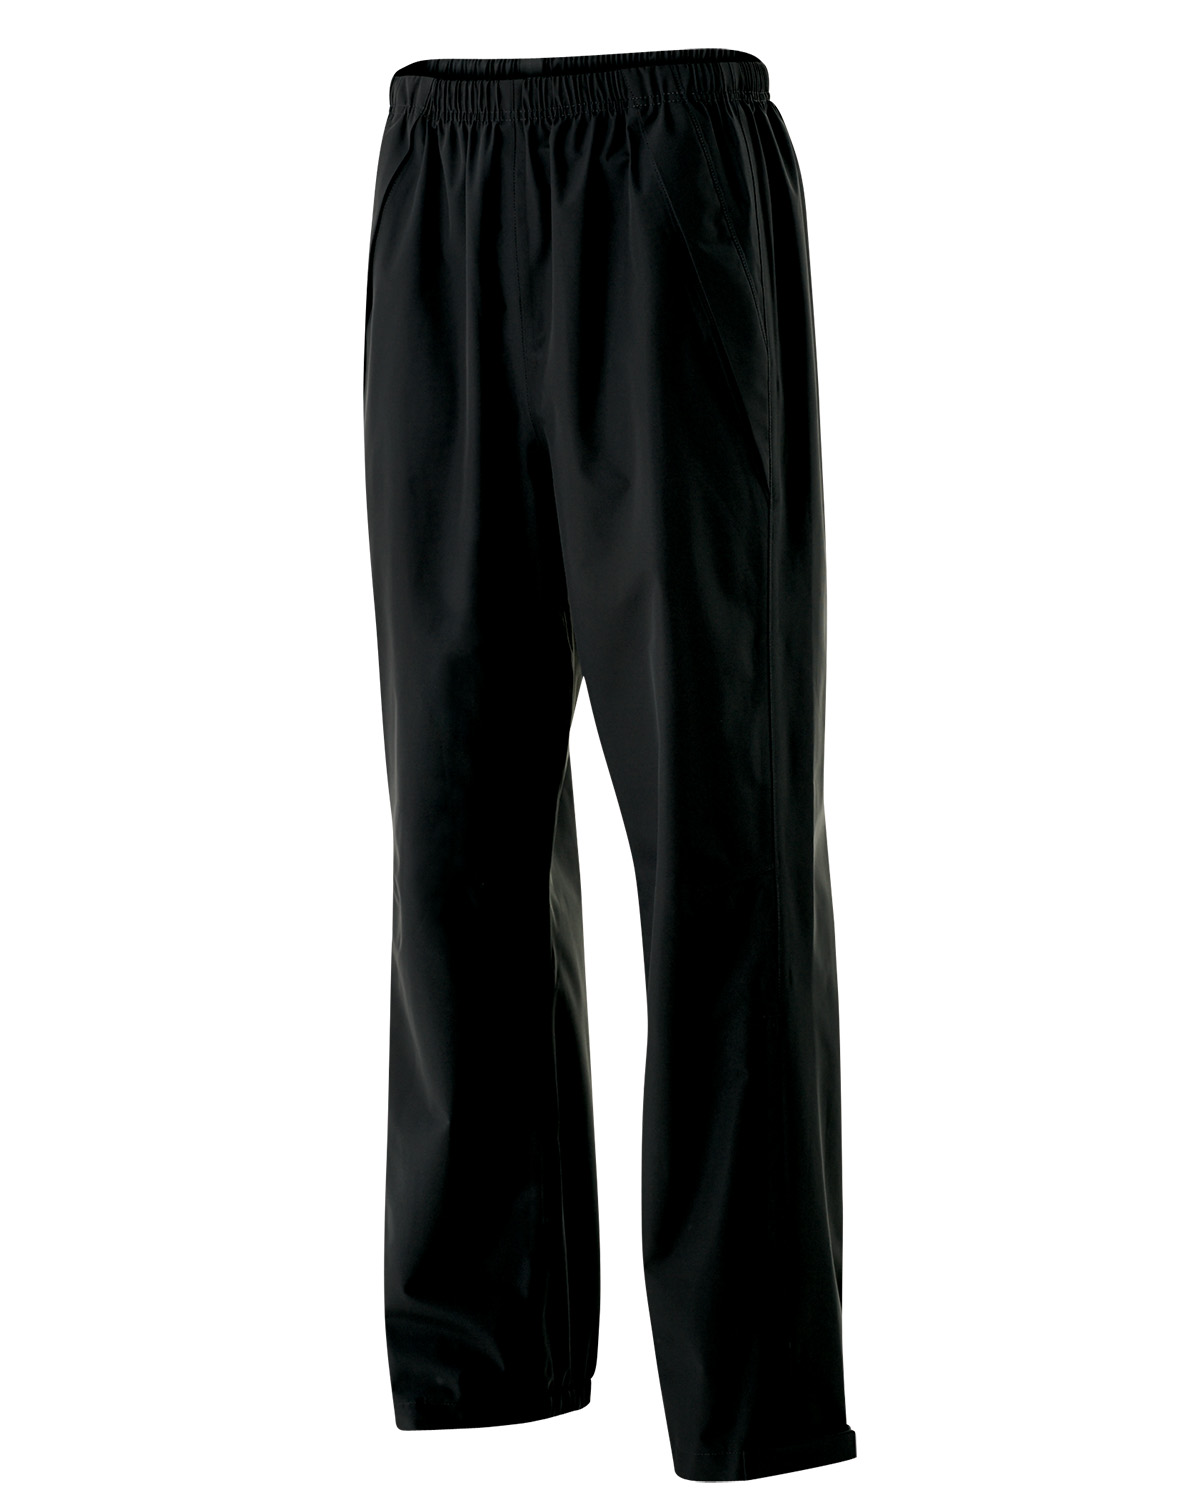 Holloway 229156 - Adult Polyester Circulate Pant